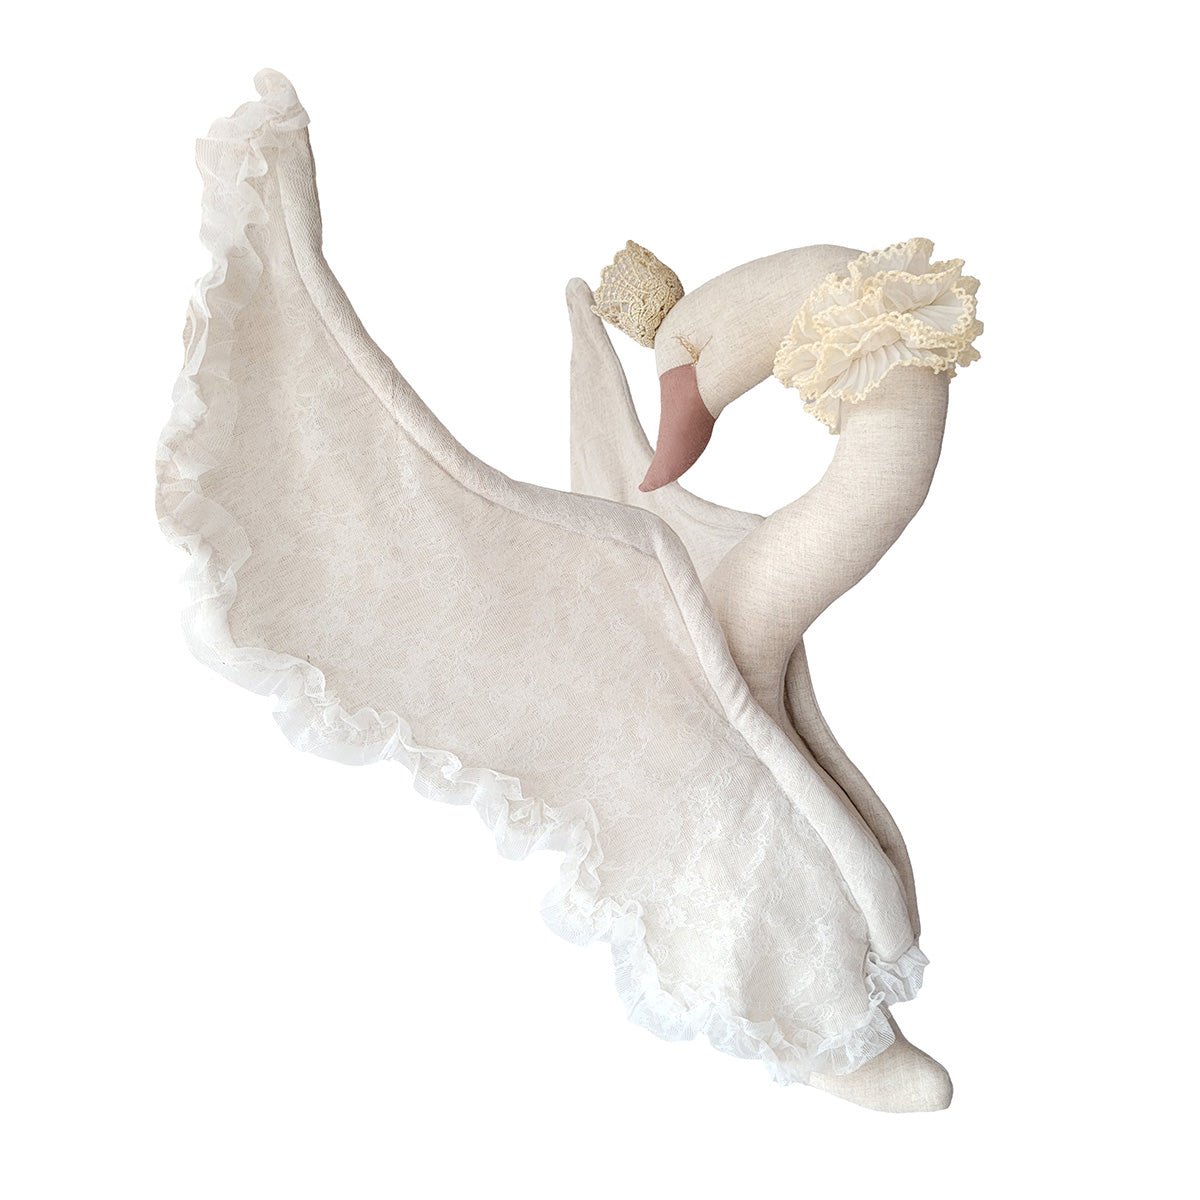 Swan with Lace by Love Me - Maude Kids Decor